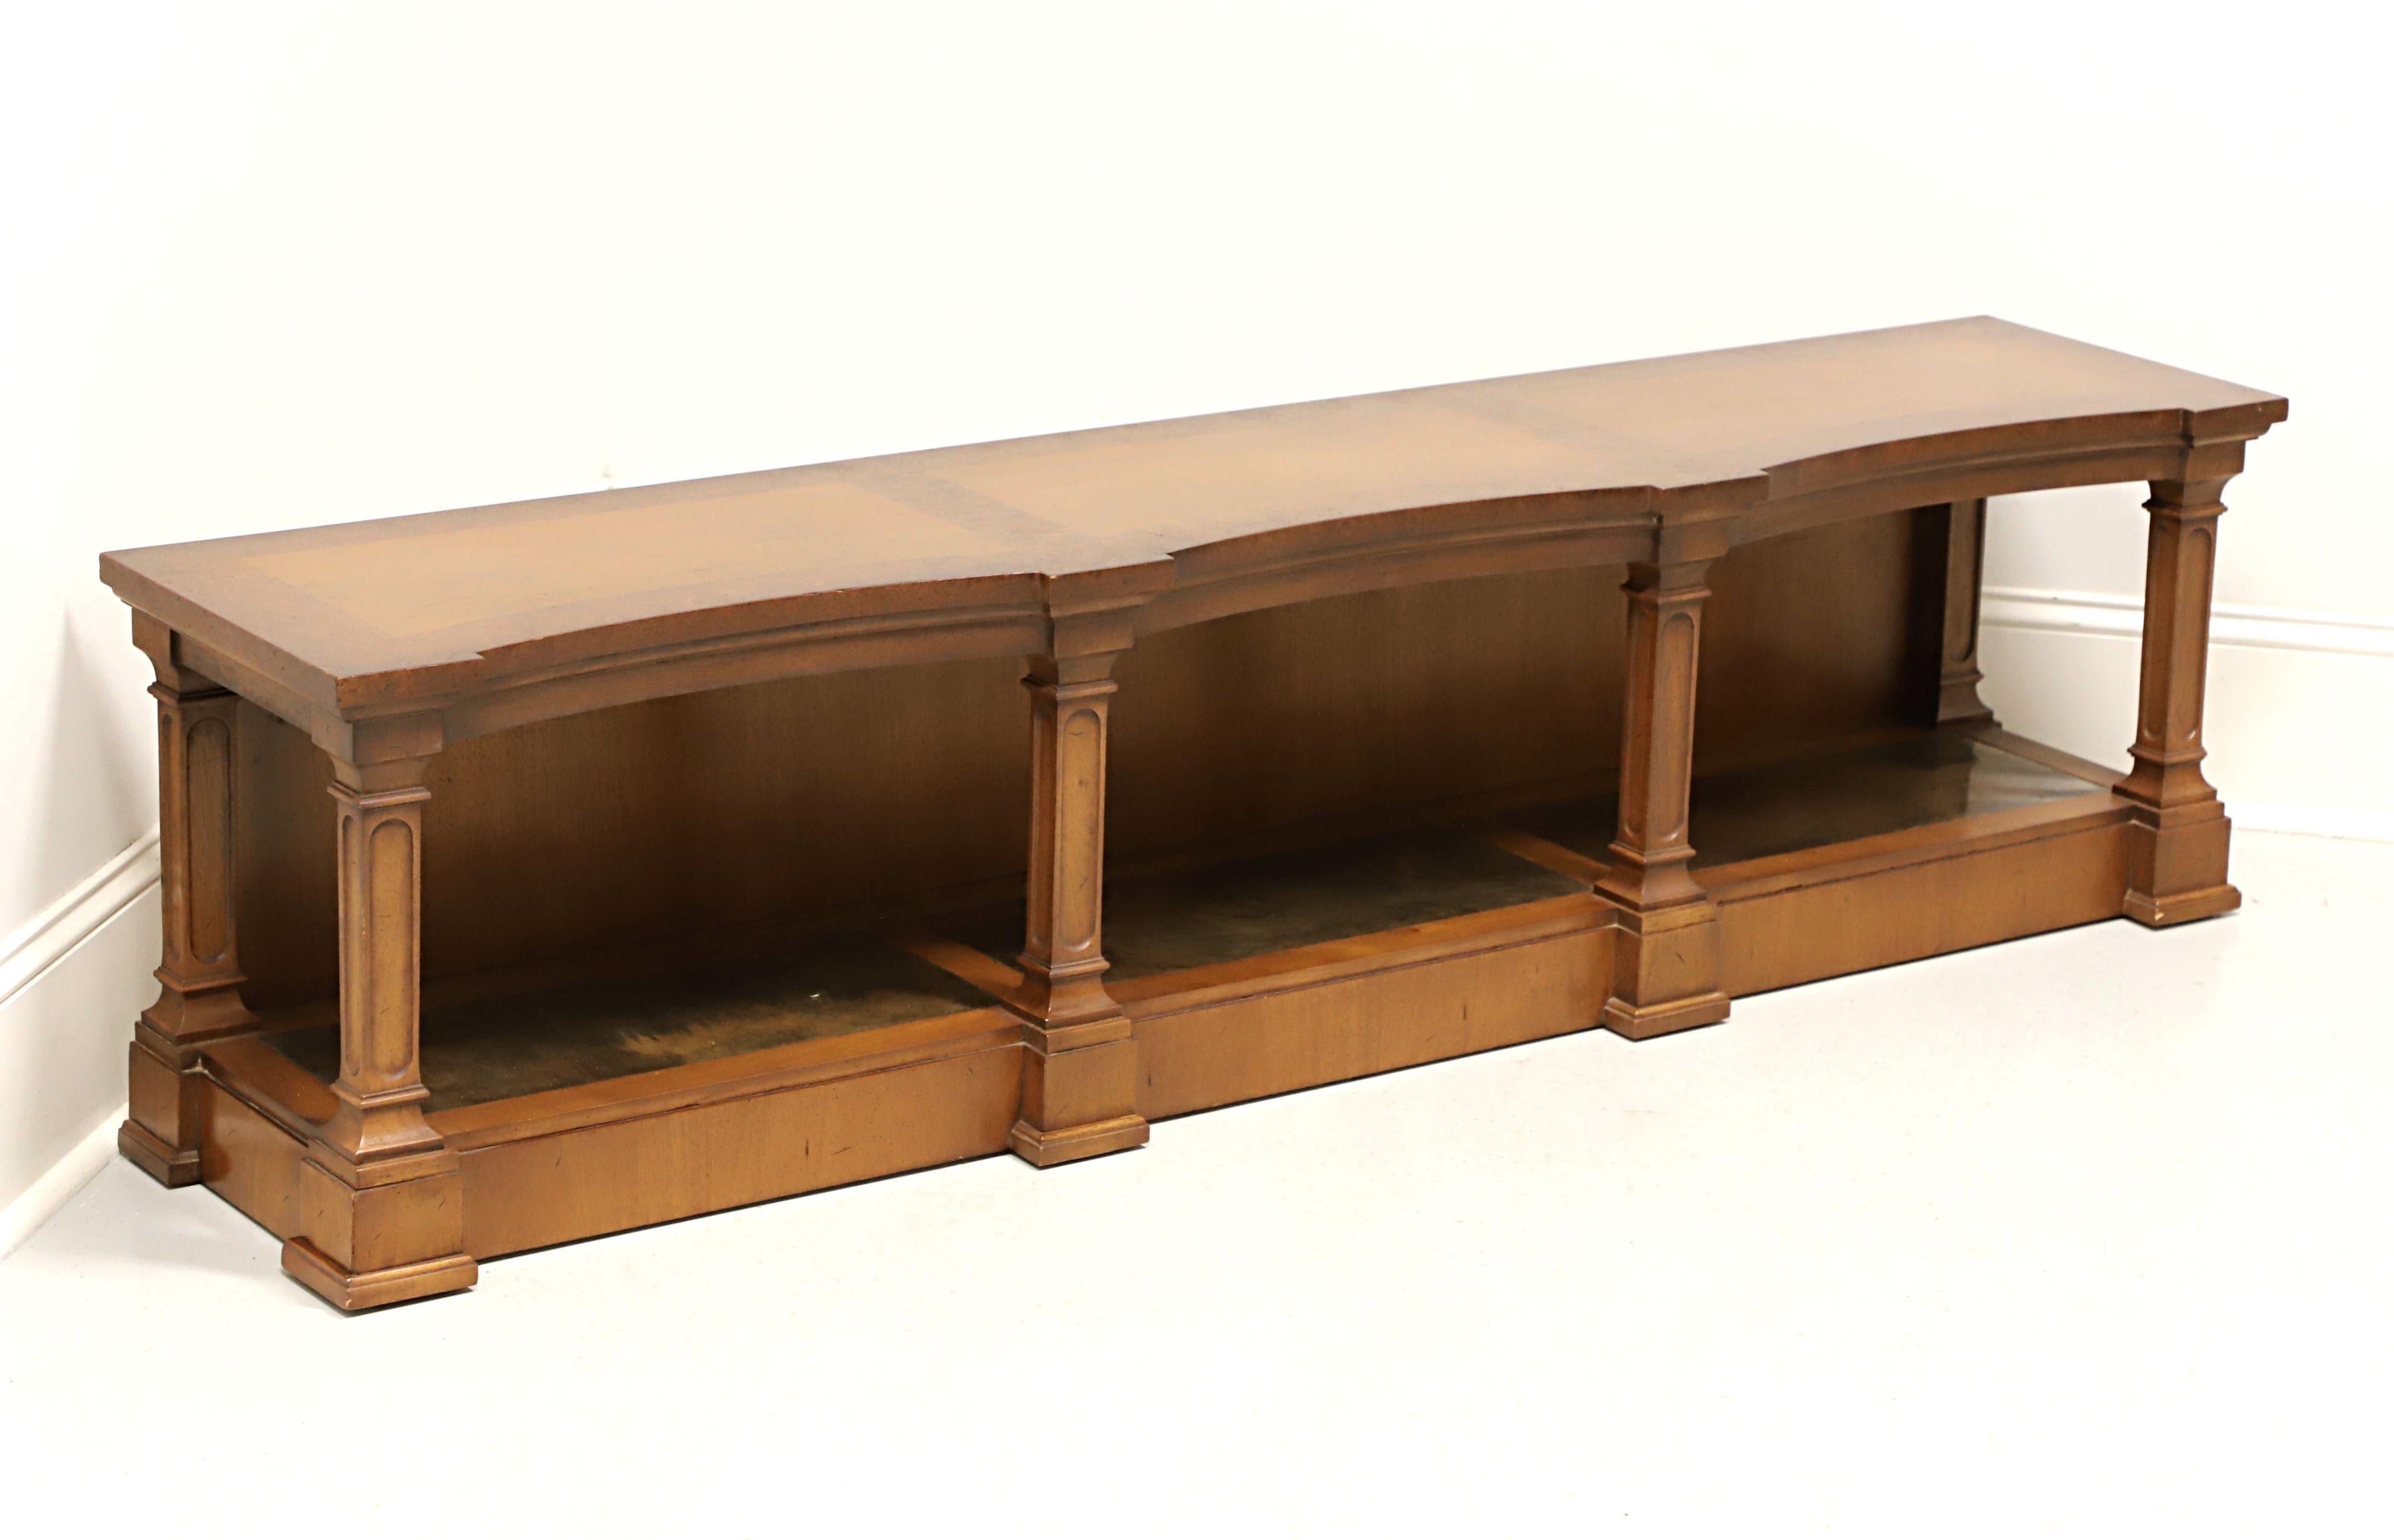 TOMLINSON 1960's Neoclassical Low Console Table / Media Stand 3